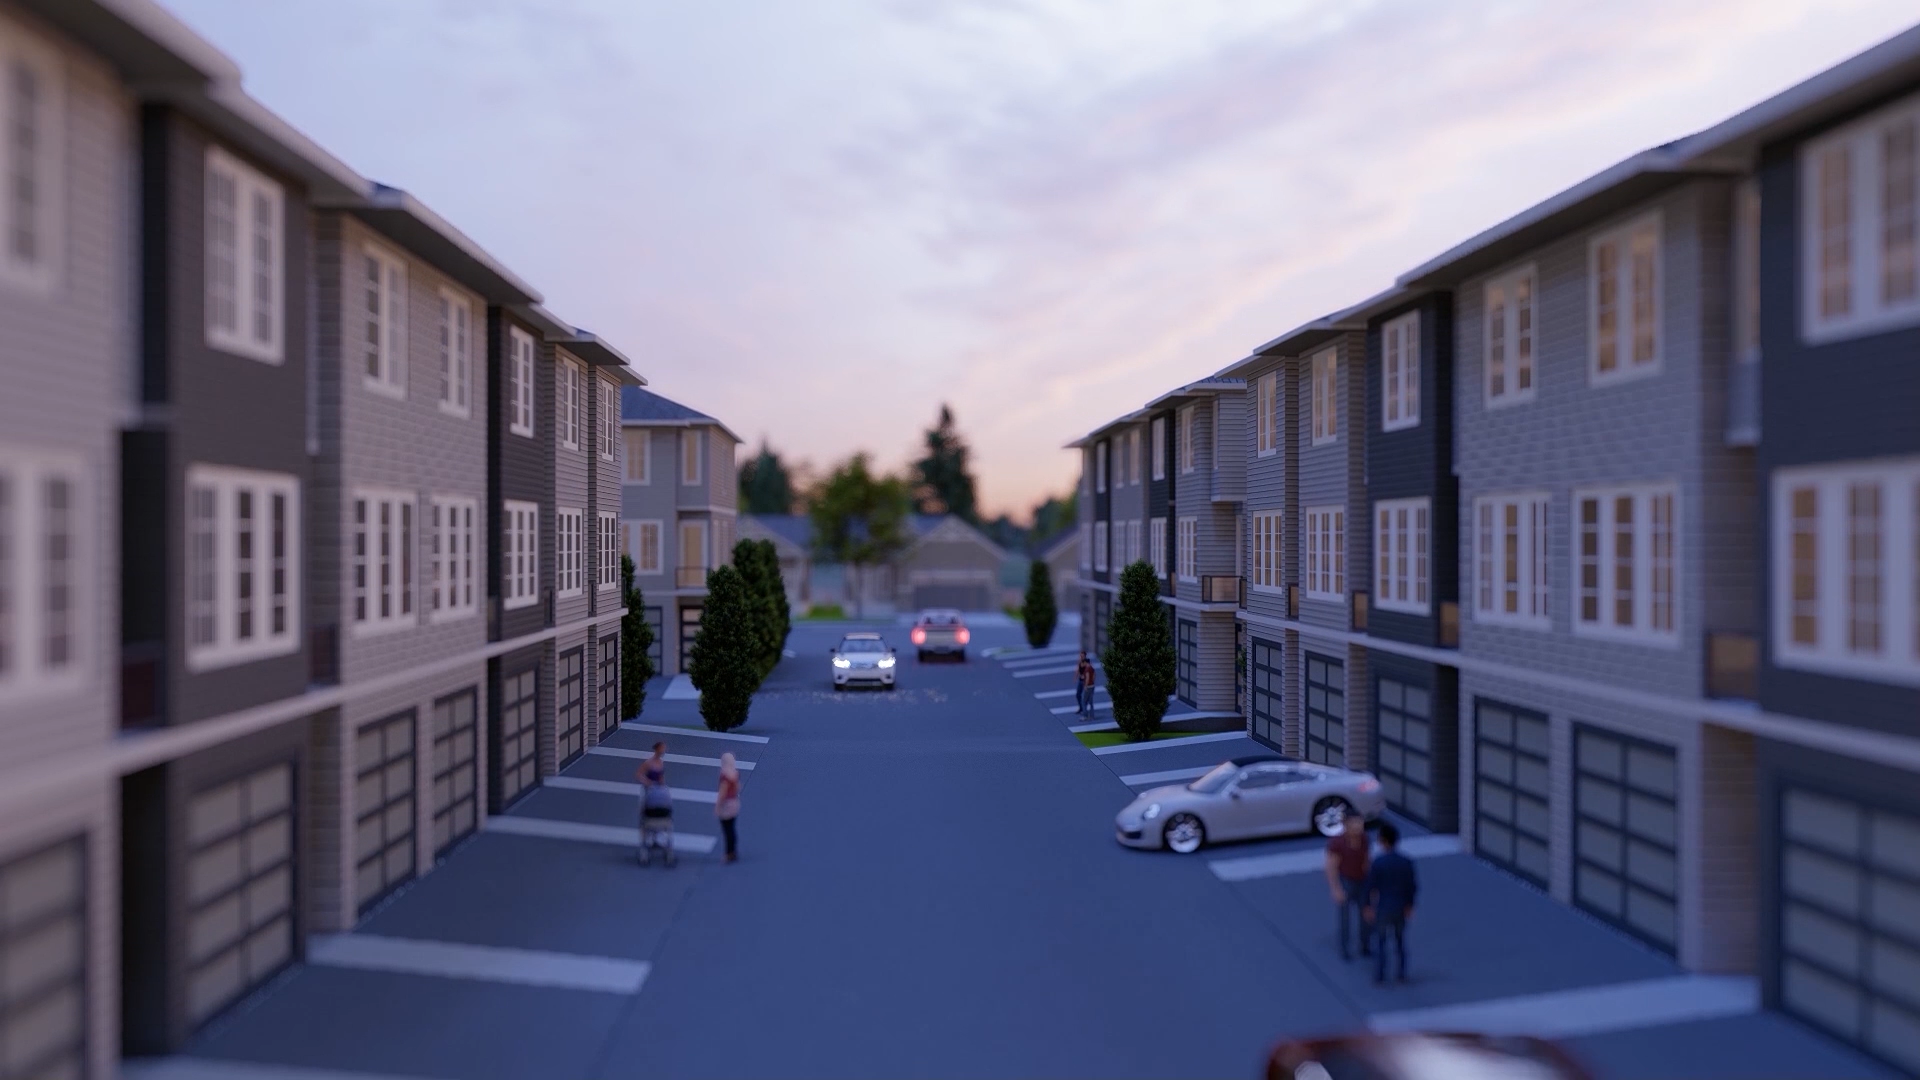 New townhouse development imminent in Lakewood of Strathmore